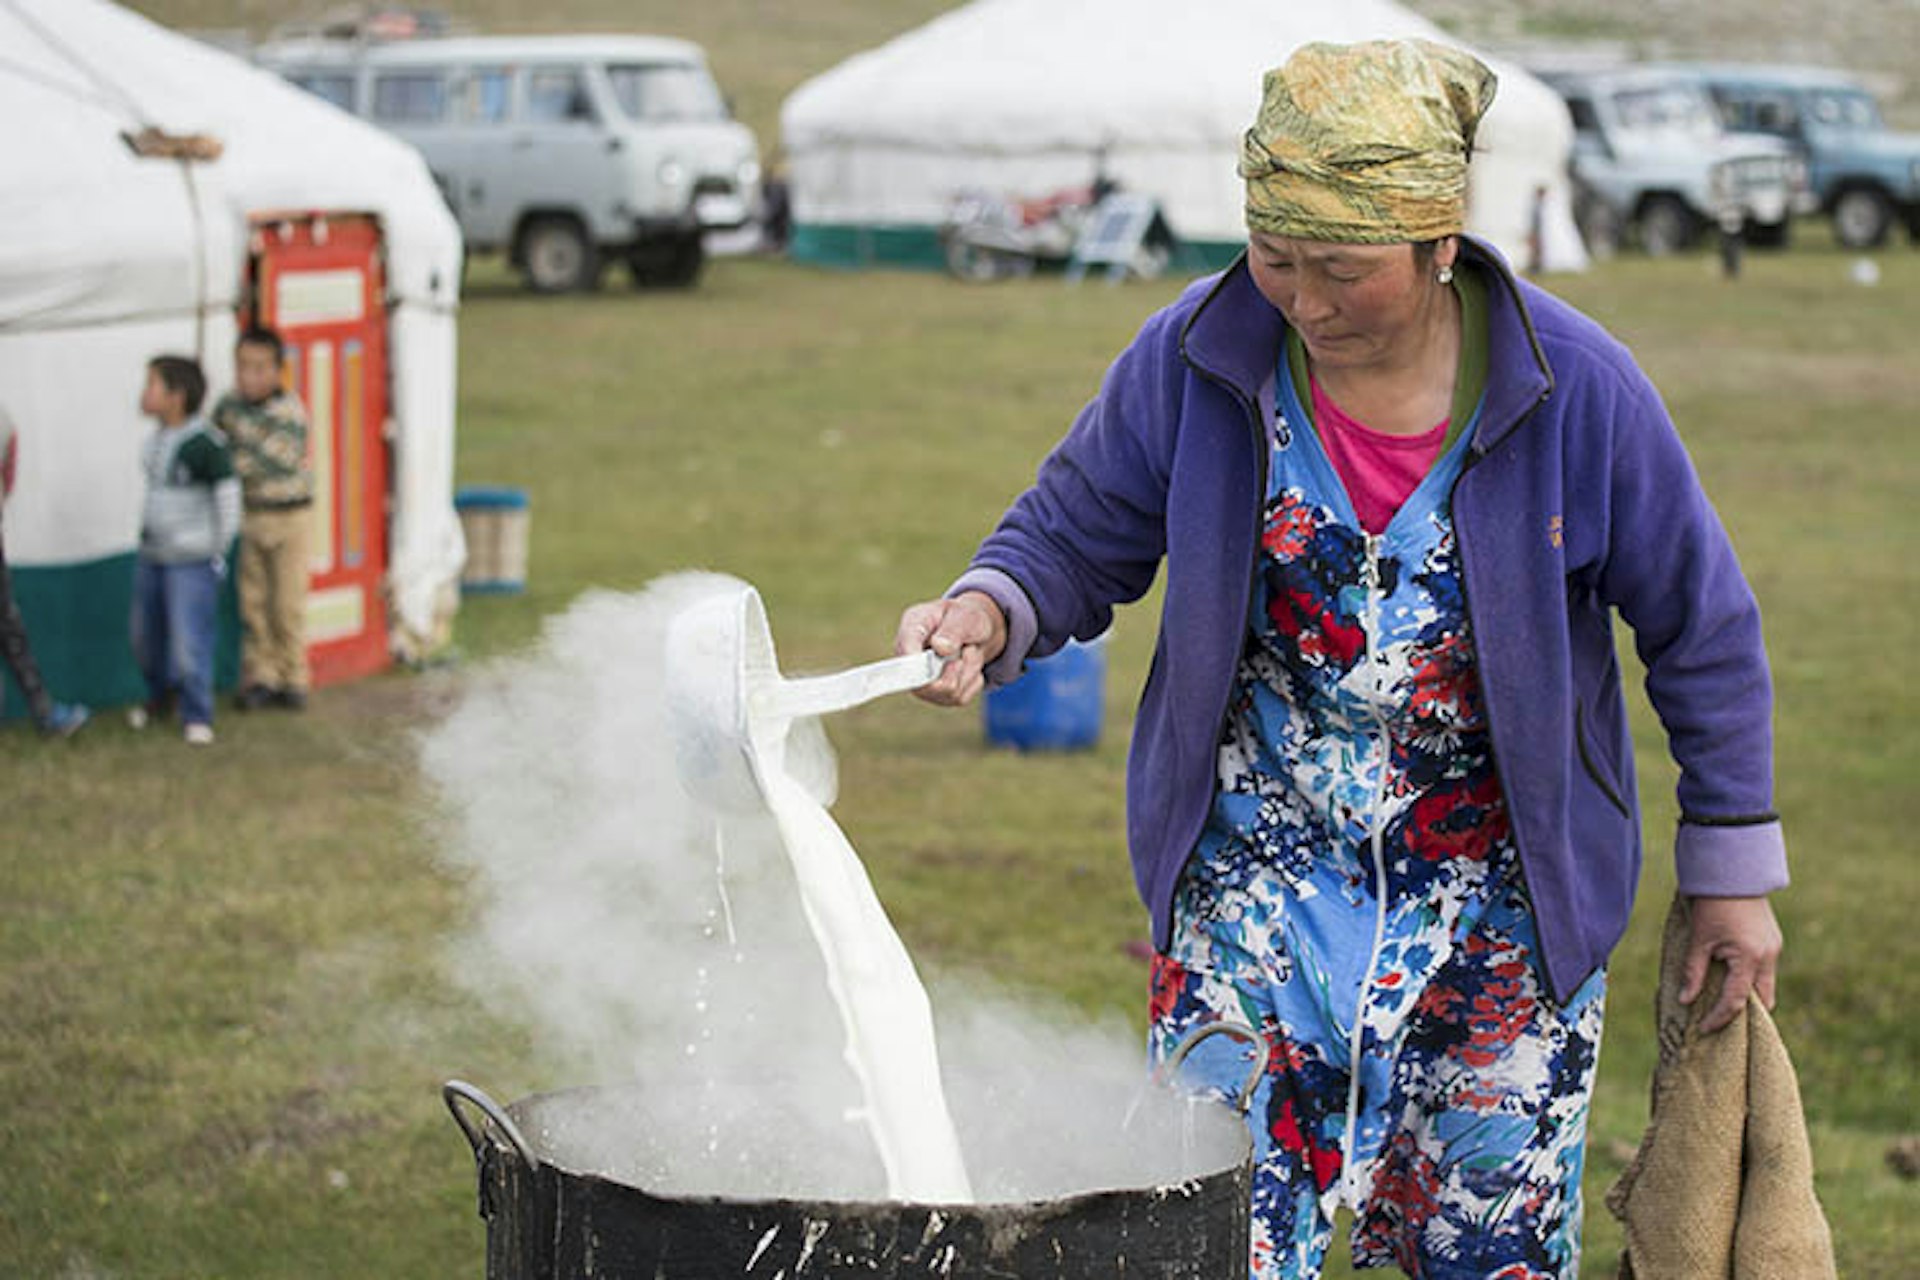 A Kazakh woman churns milk over a fire to make cheese. Image by David Baxendale / Lonely Planet